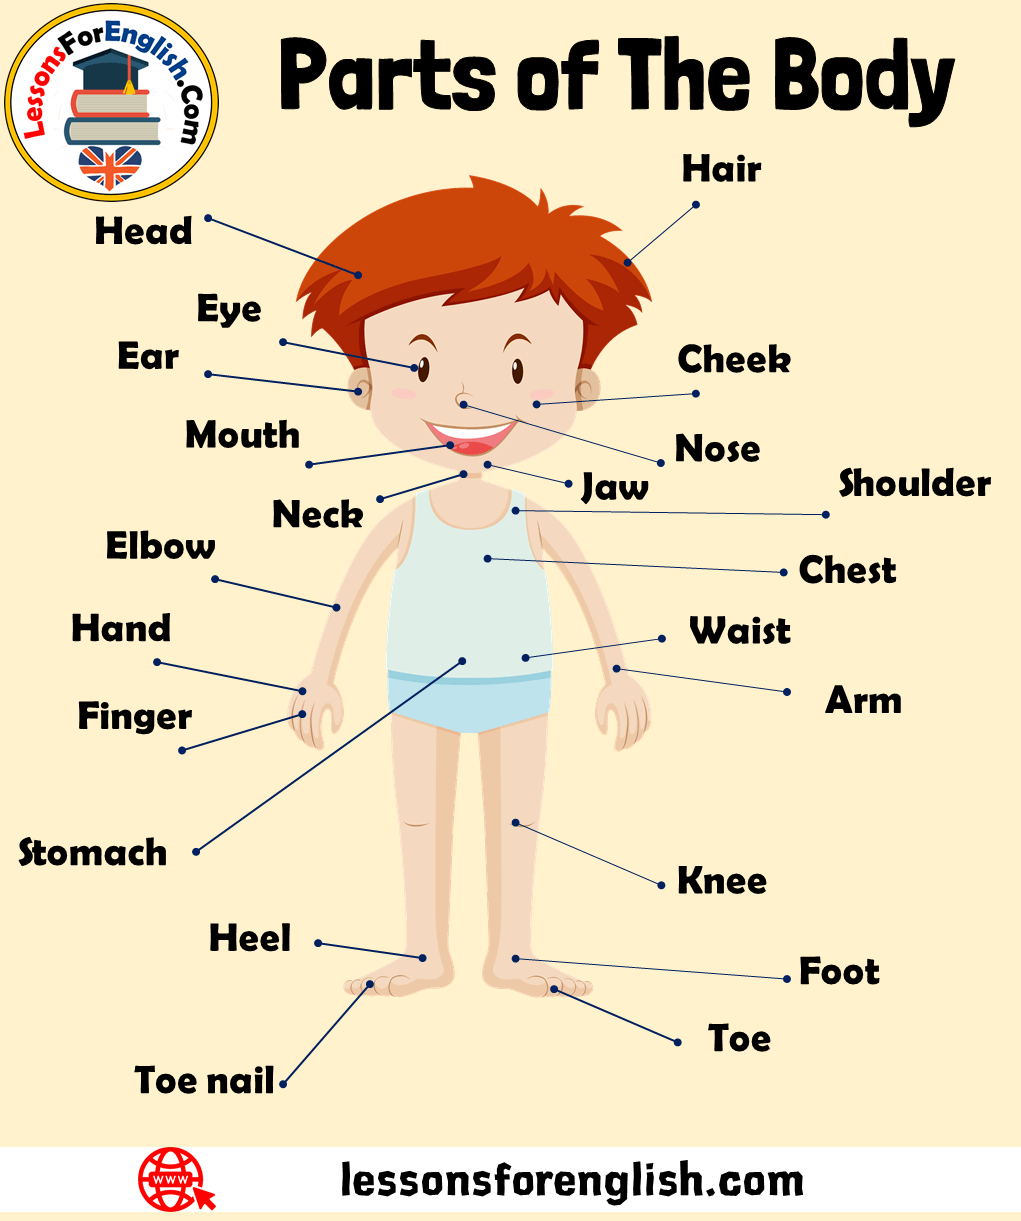 parts-of-the-body-vocabulary-definition-and-examples-lessons-for-english